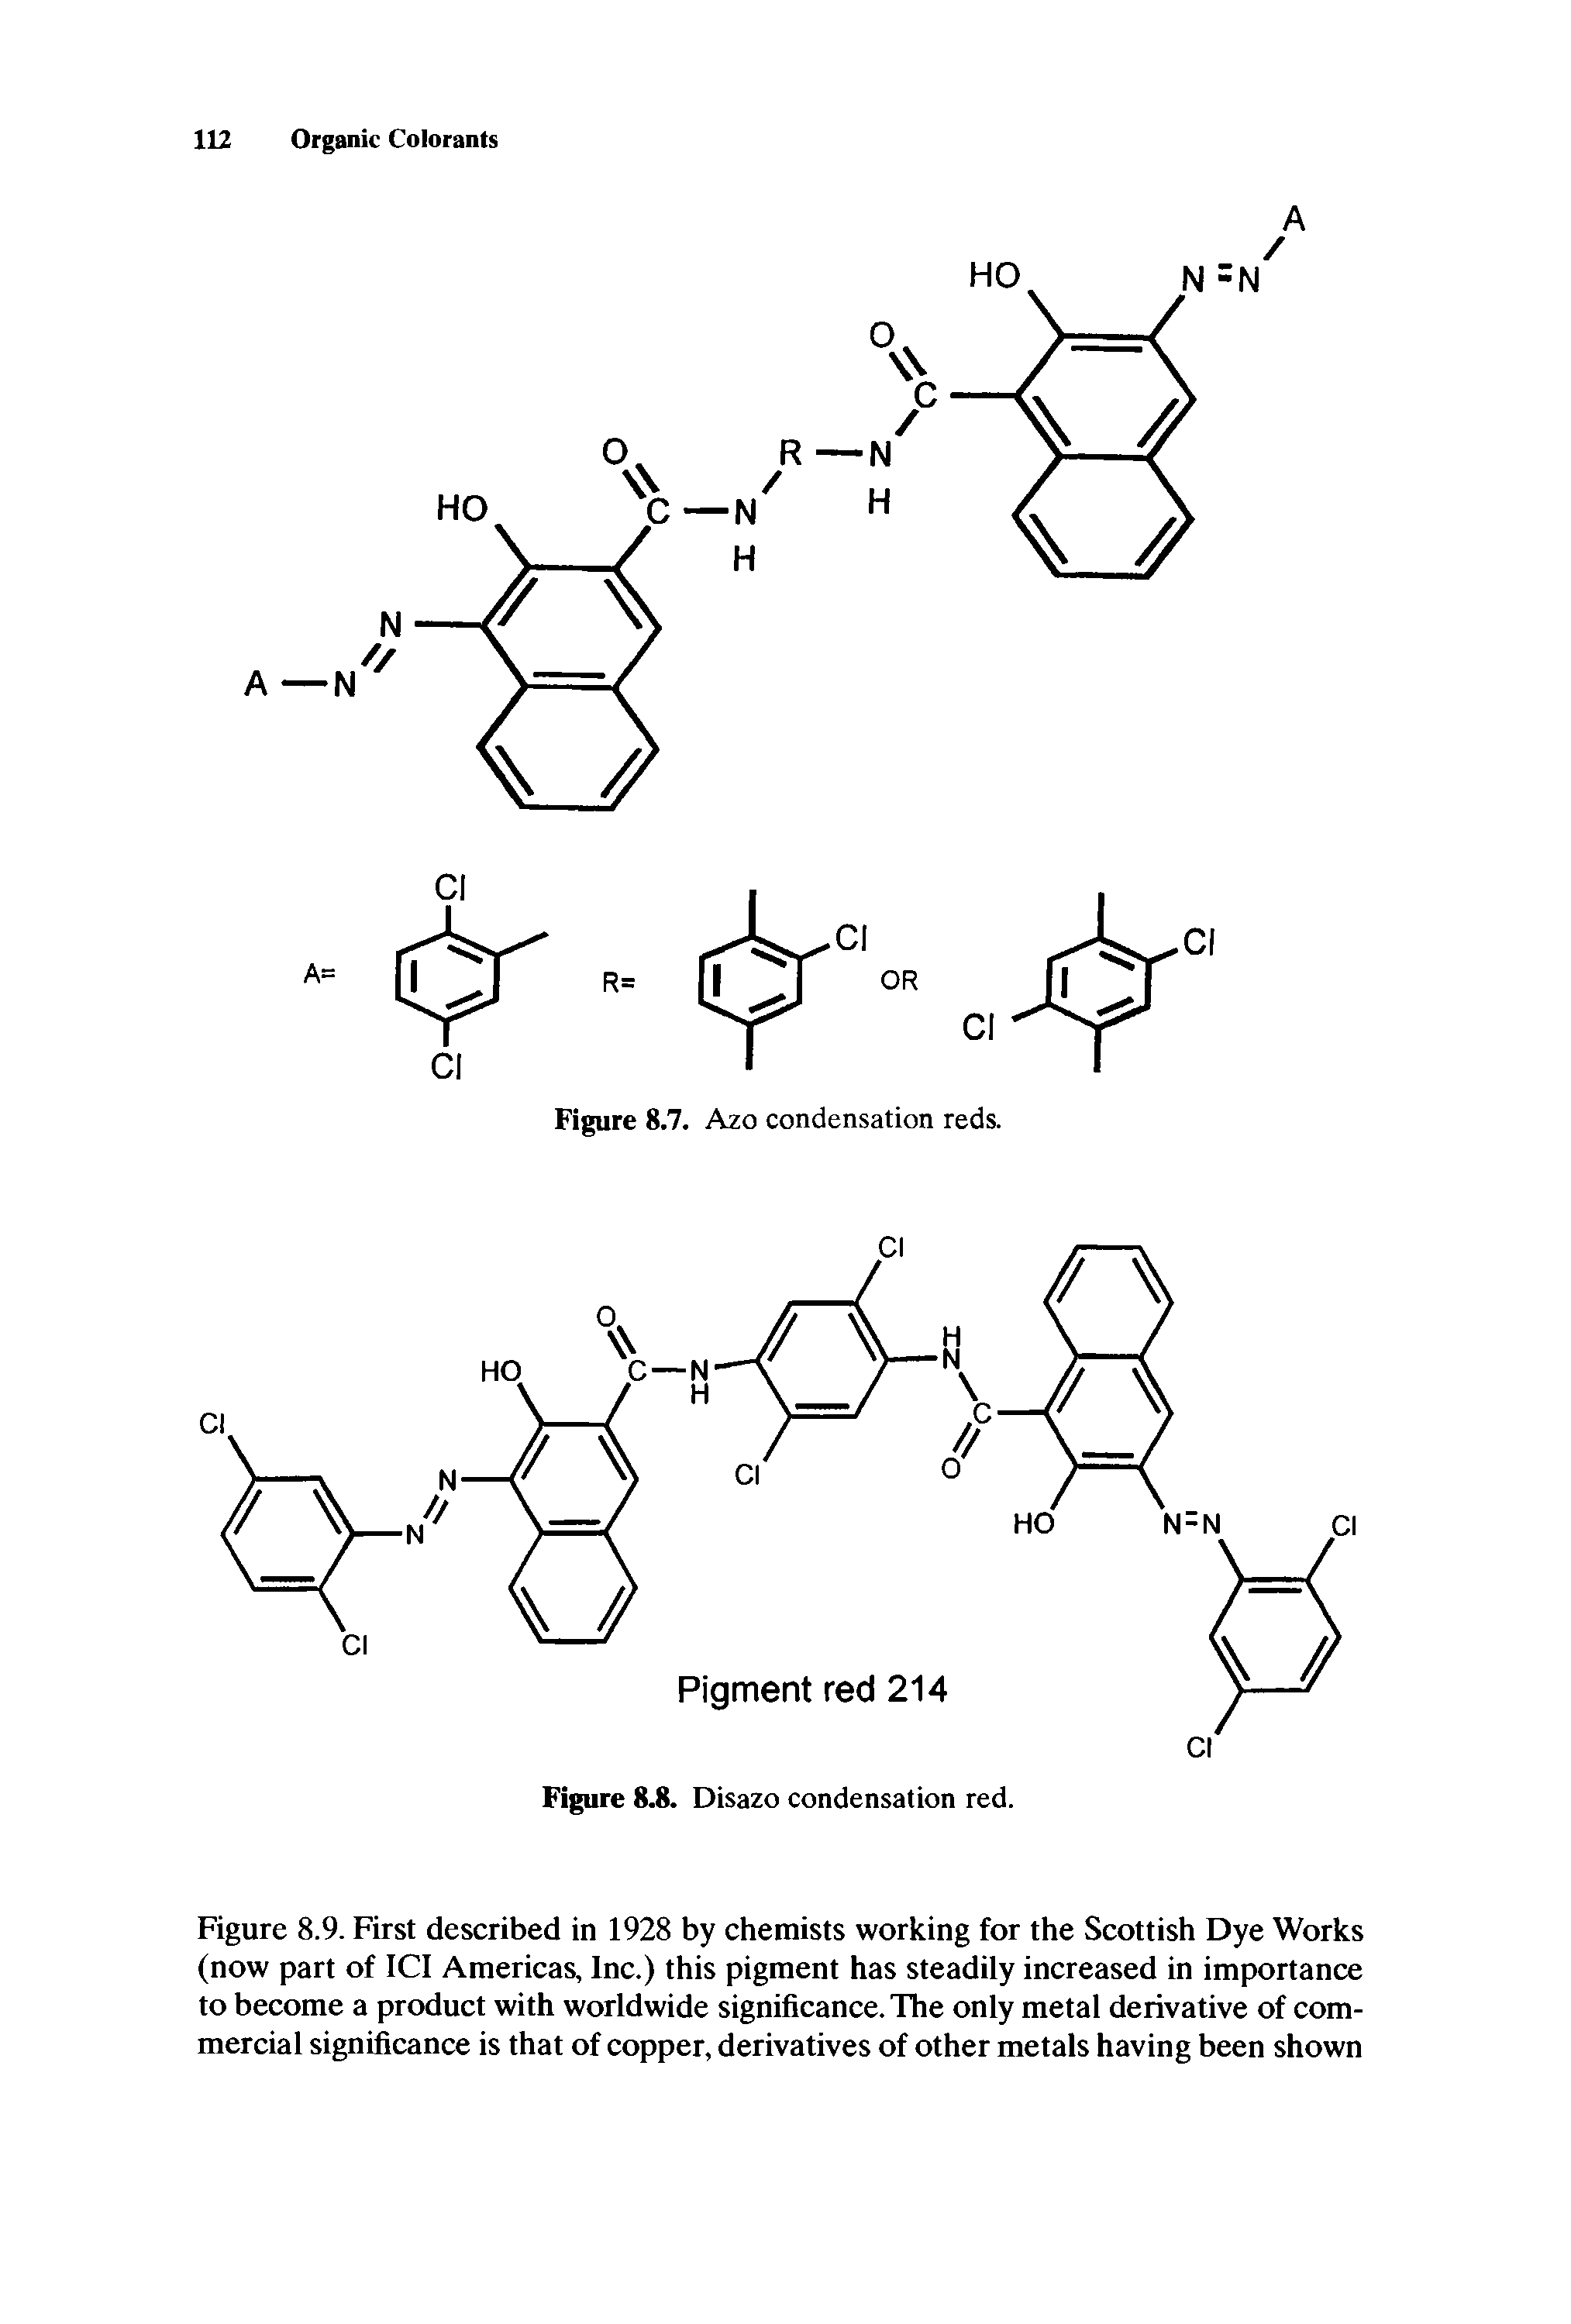 Figure 8.9. First described in 1928 by chemists working for the Scottish Dye Works (now part of ICI Americas, Inc.) this pigment has steadily increased in importance to become a product with worldwide significance. The only metal derivative of commercial significance is that of copper, derivatives of other metals having been shown...